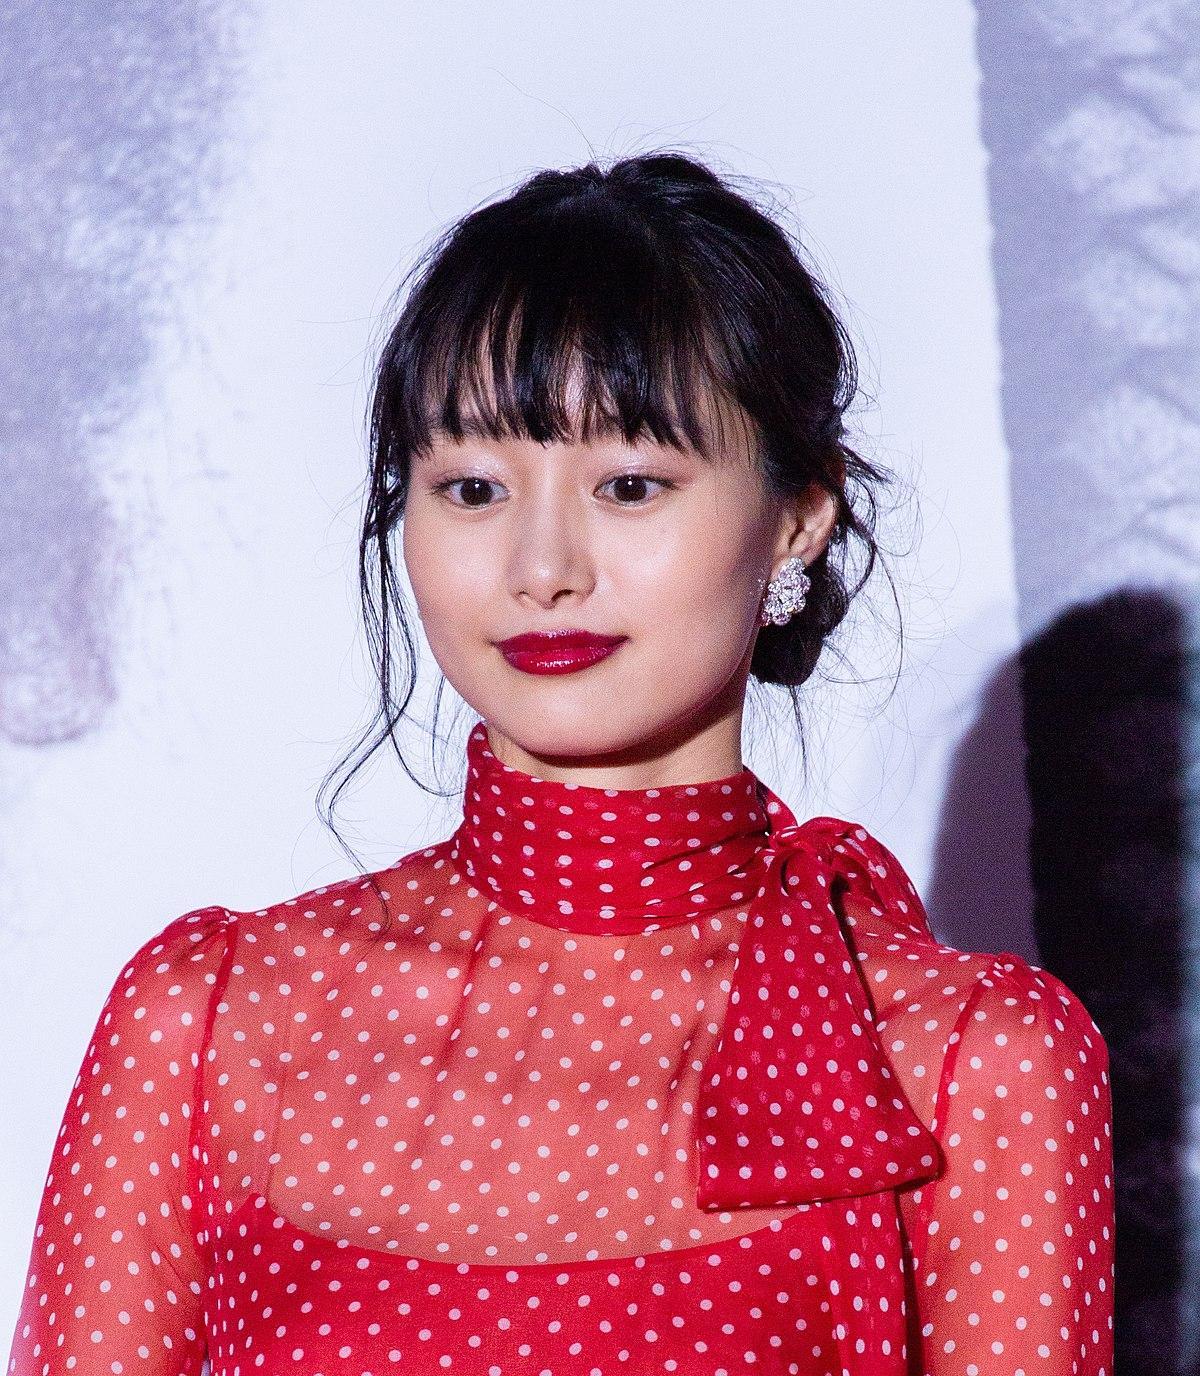 65+ Hot Pictures Of Yukio a.k.a Shiori Kutsuna From Deadpool 2 With Interesting Facts About Her | Best Of Comic Books